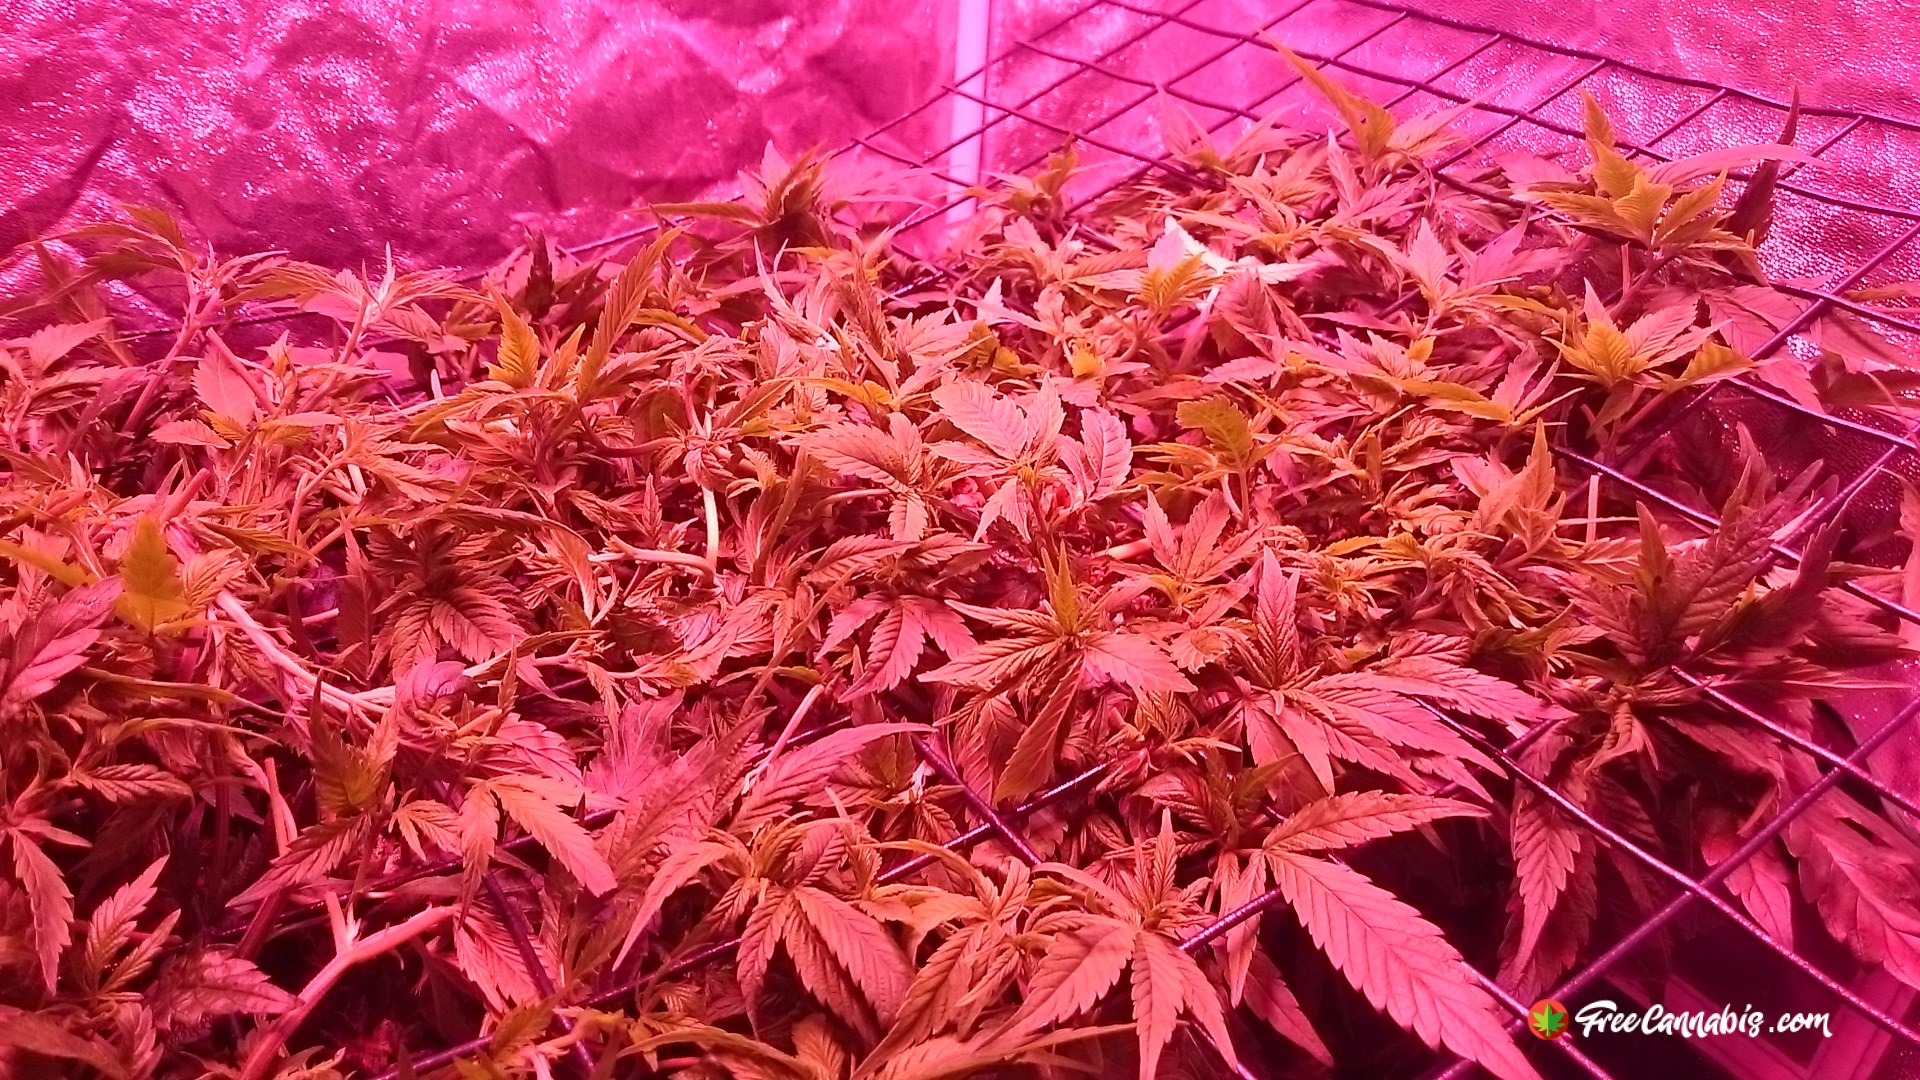 Scrog not far from being ready to flower